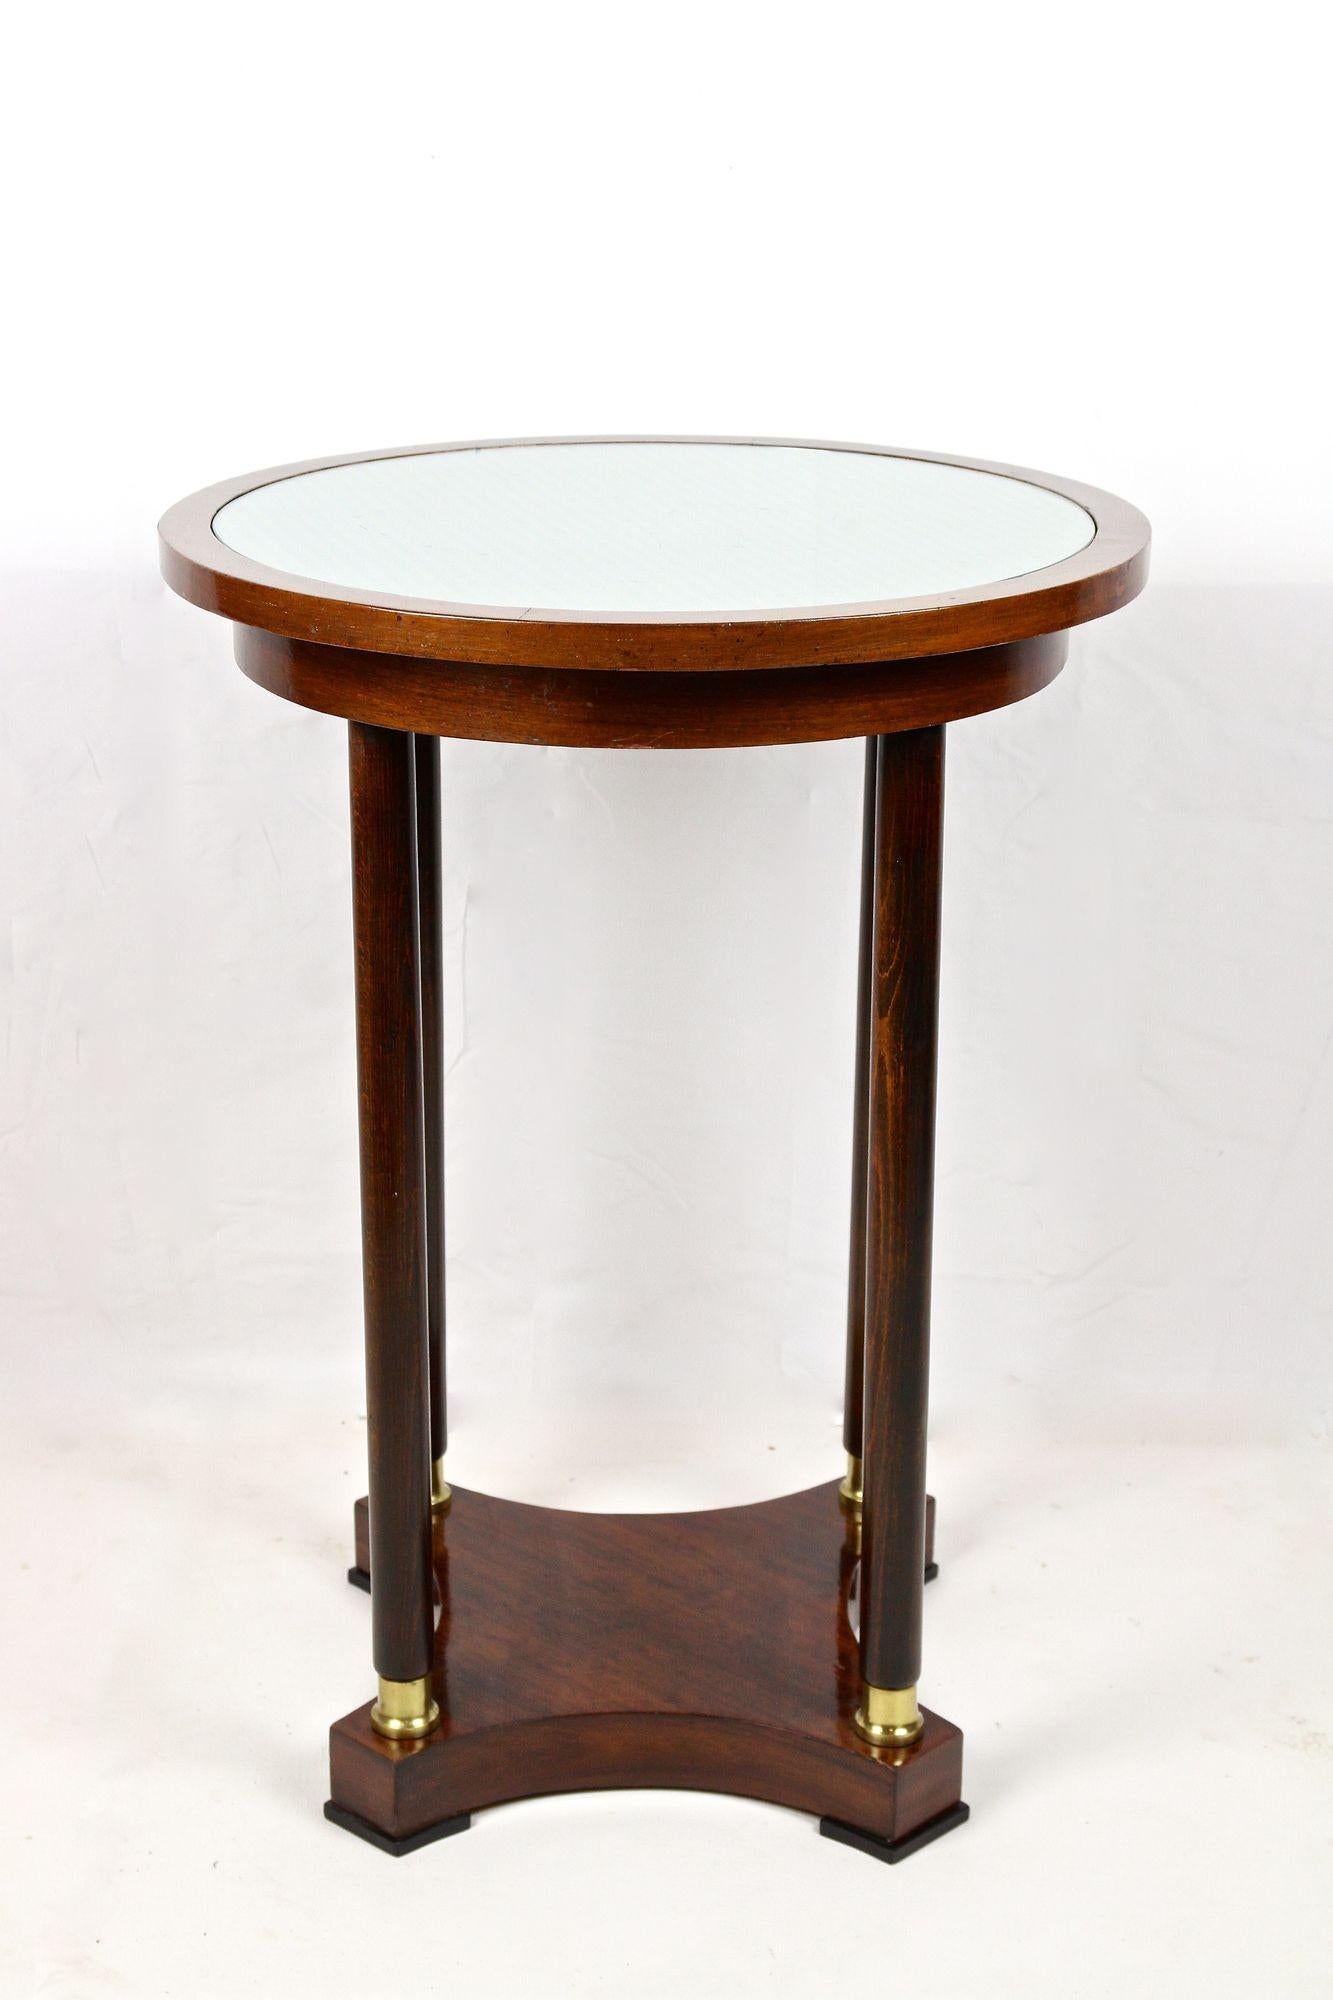 20th Century Art Nouveau Side Table/ Coffee Table, Austria ca. 1905 In Good Condition For Sale In Lichtenberg, AT